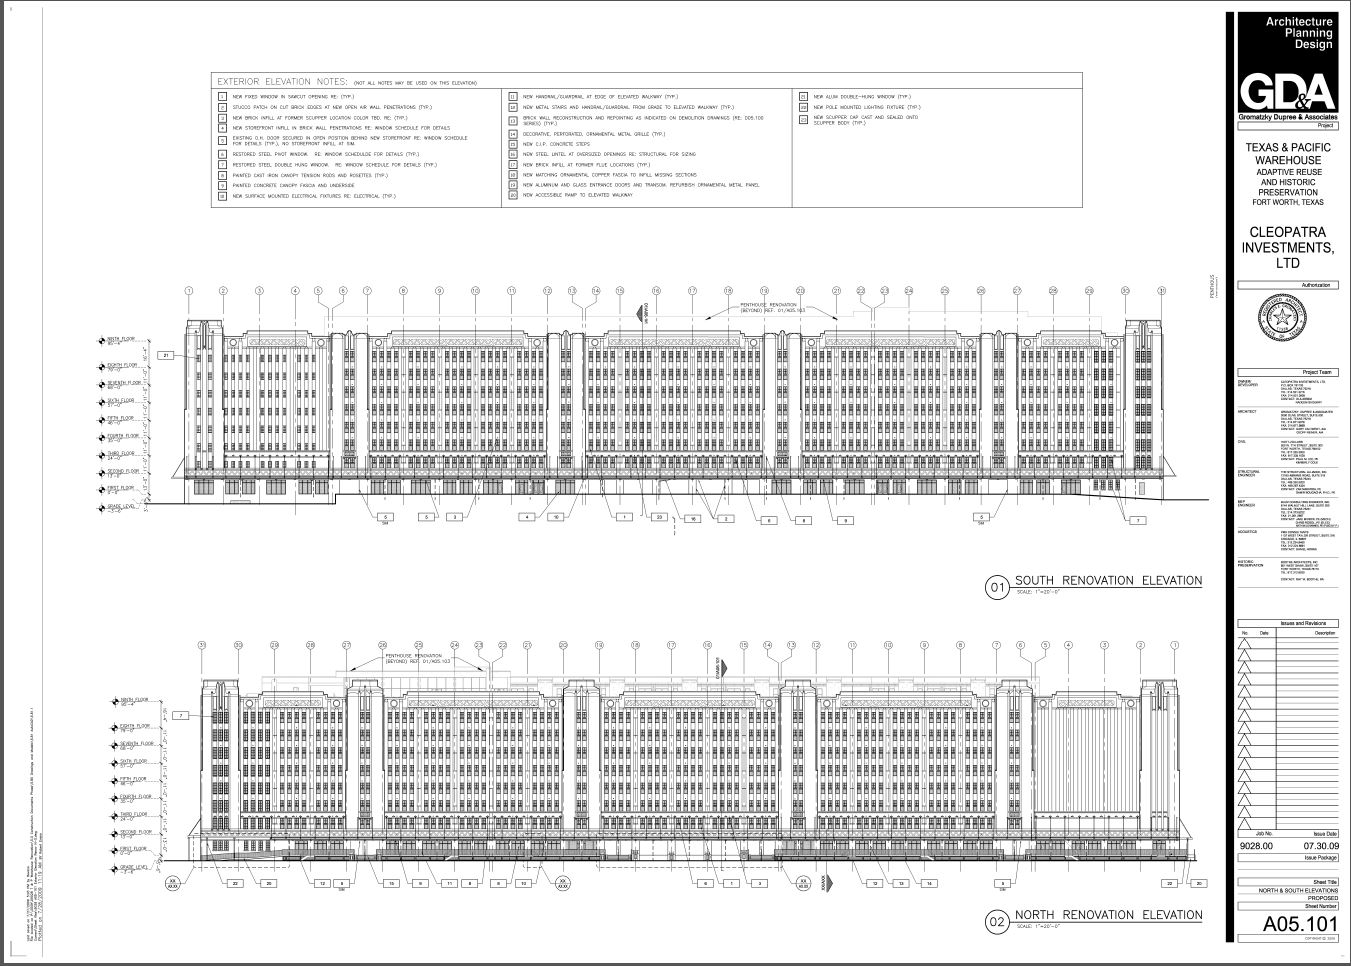 Approved Plans for New Construction with Enlarged Windows - North & South Elevations